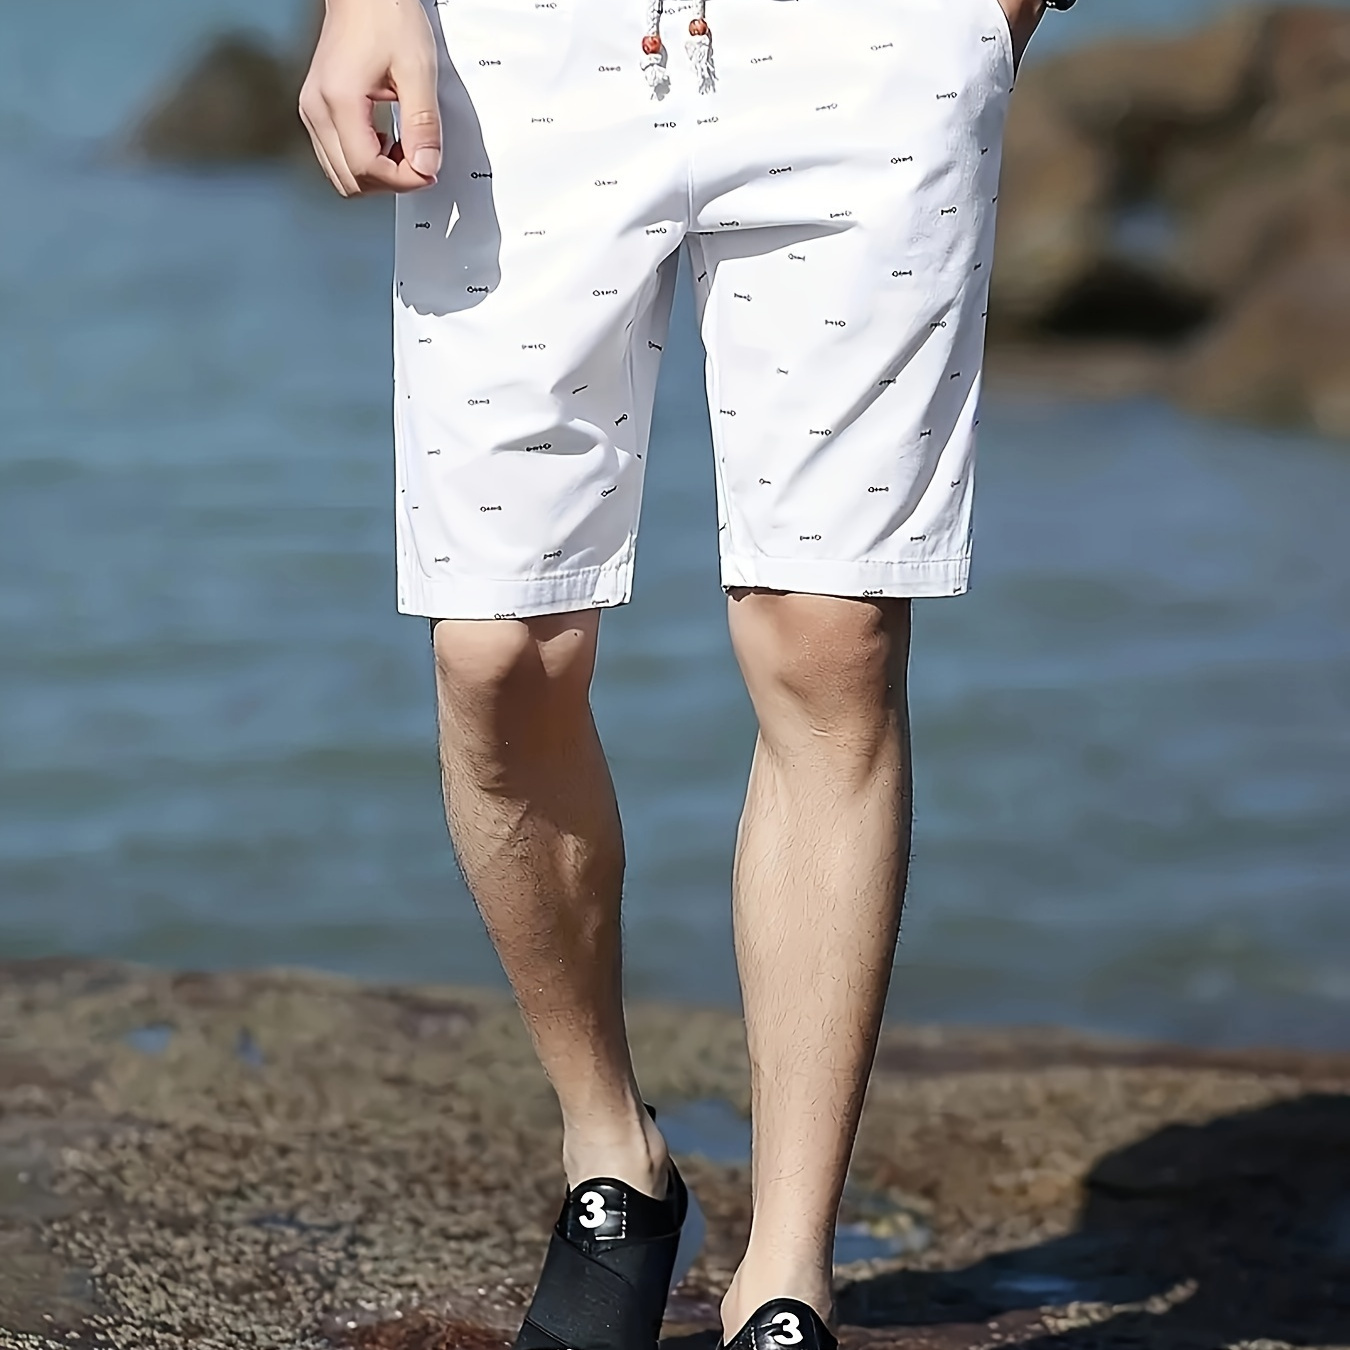 

Men's Trendy Hawaiian Graphic Shorts With Drawstring And Fancy Prints For Summer Beach, Pool And Vacation